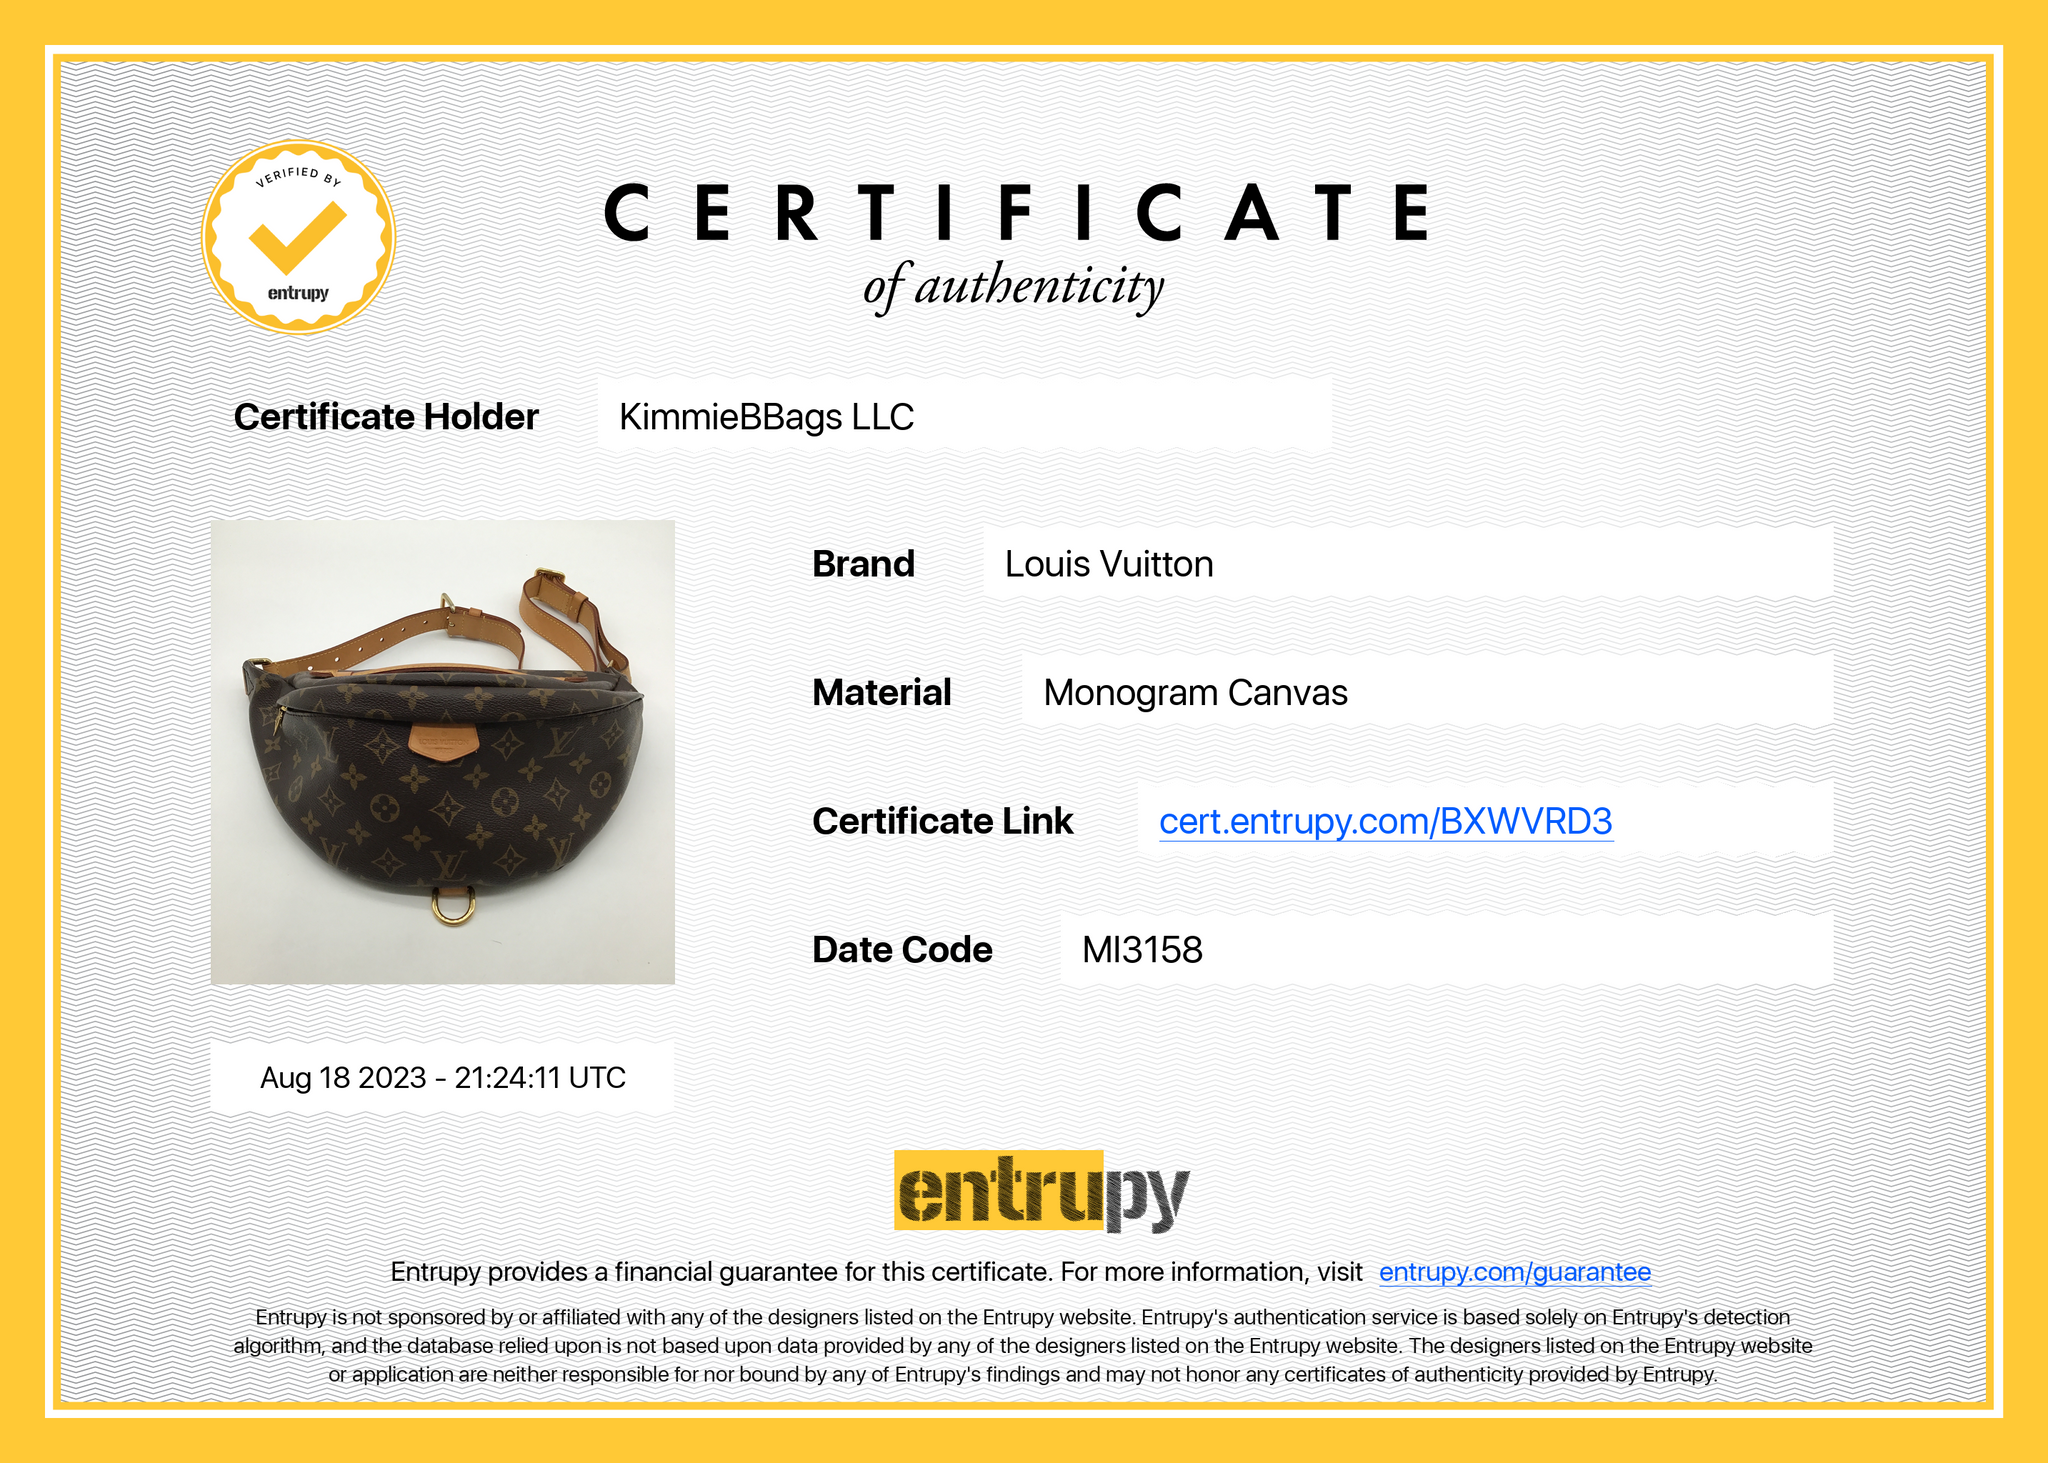 Entrupy or Real Authentication Certificate of Authenticity